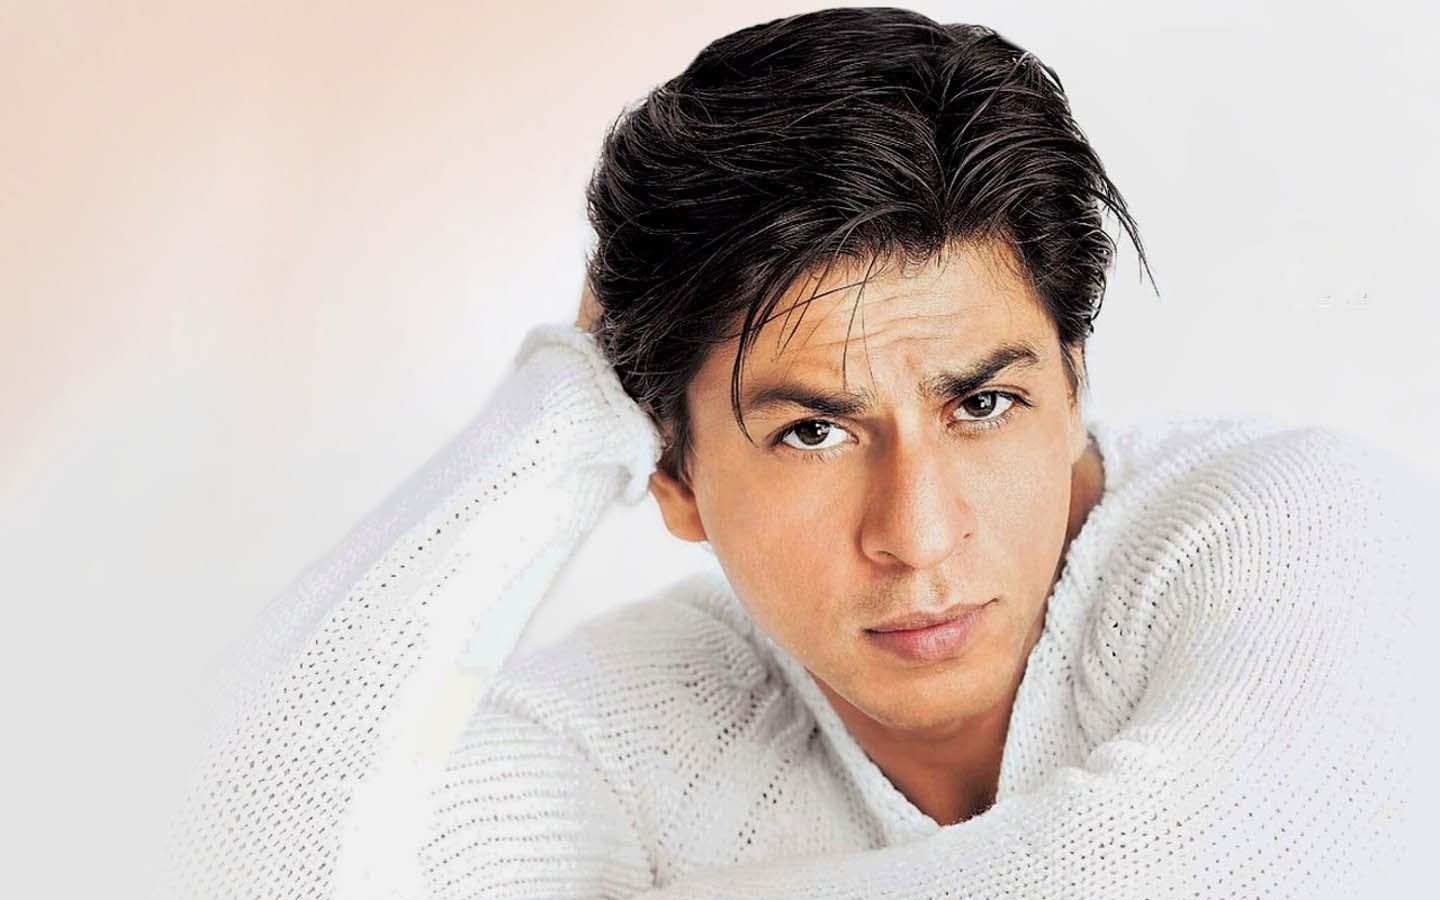 10 Most Unusual Facts about SRK, You Have Never Heard Before Awesome